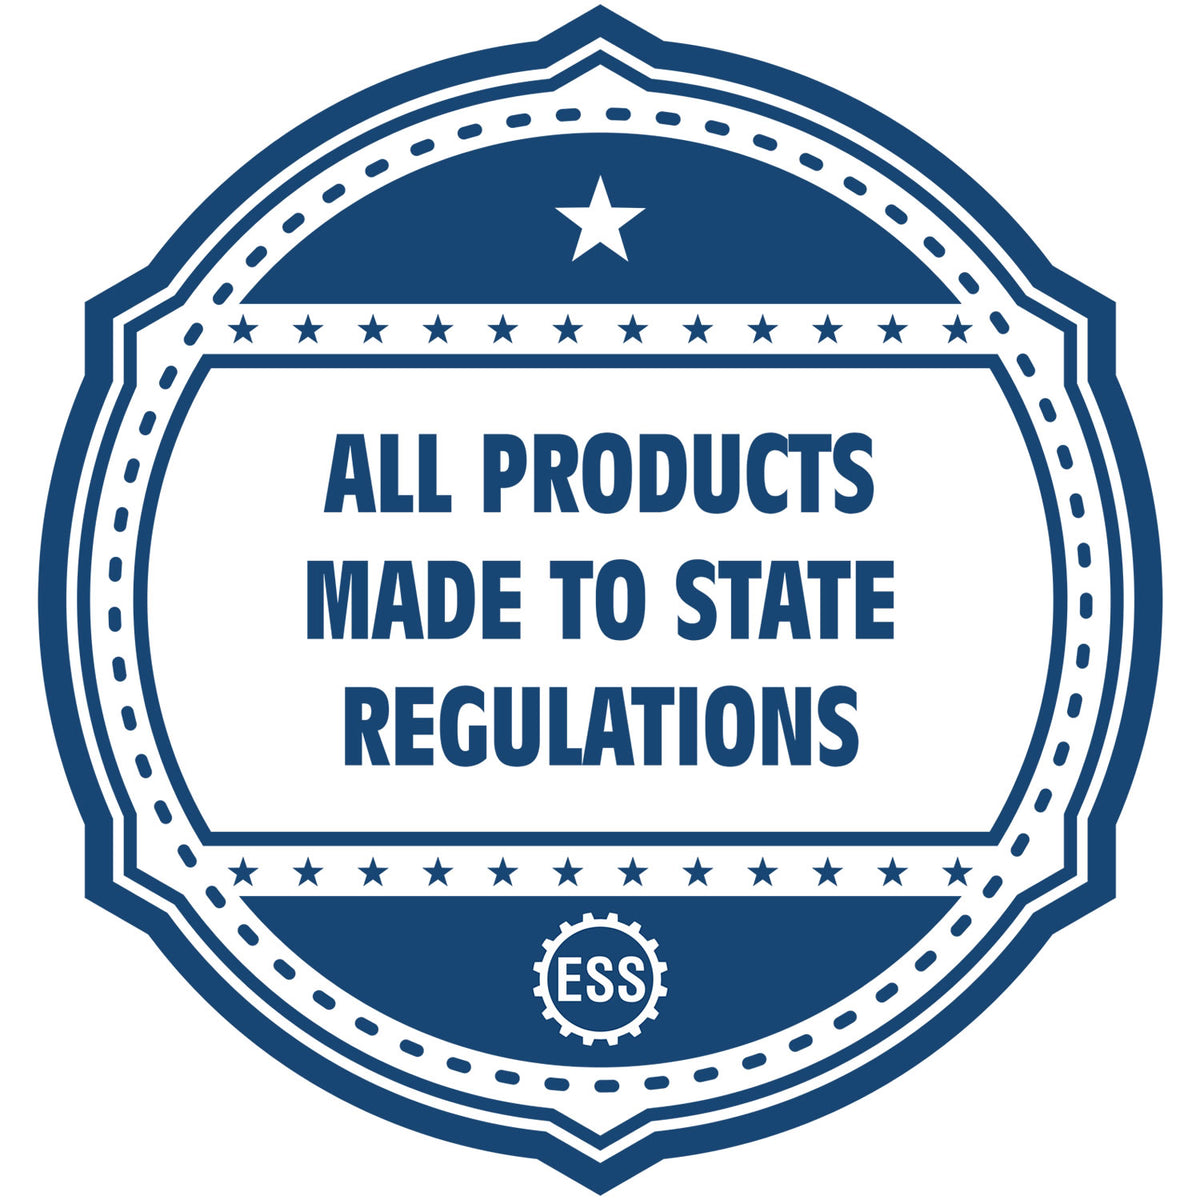 An icon or badge element for the Slim Pre-Inked Iowa Professional Engineer Seal Stamp showing that this product is made in compliance with state regulations.